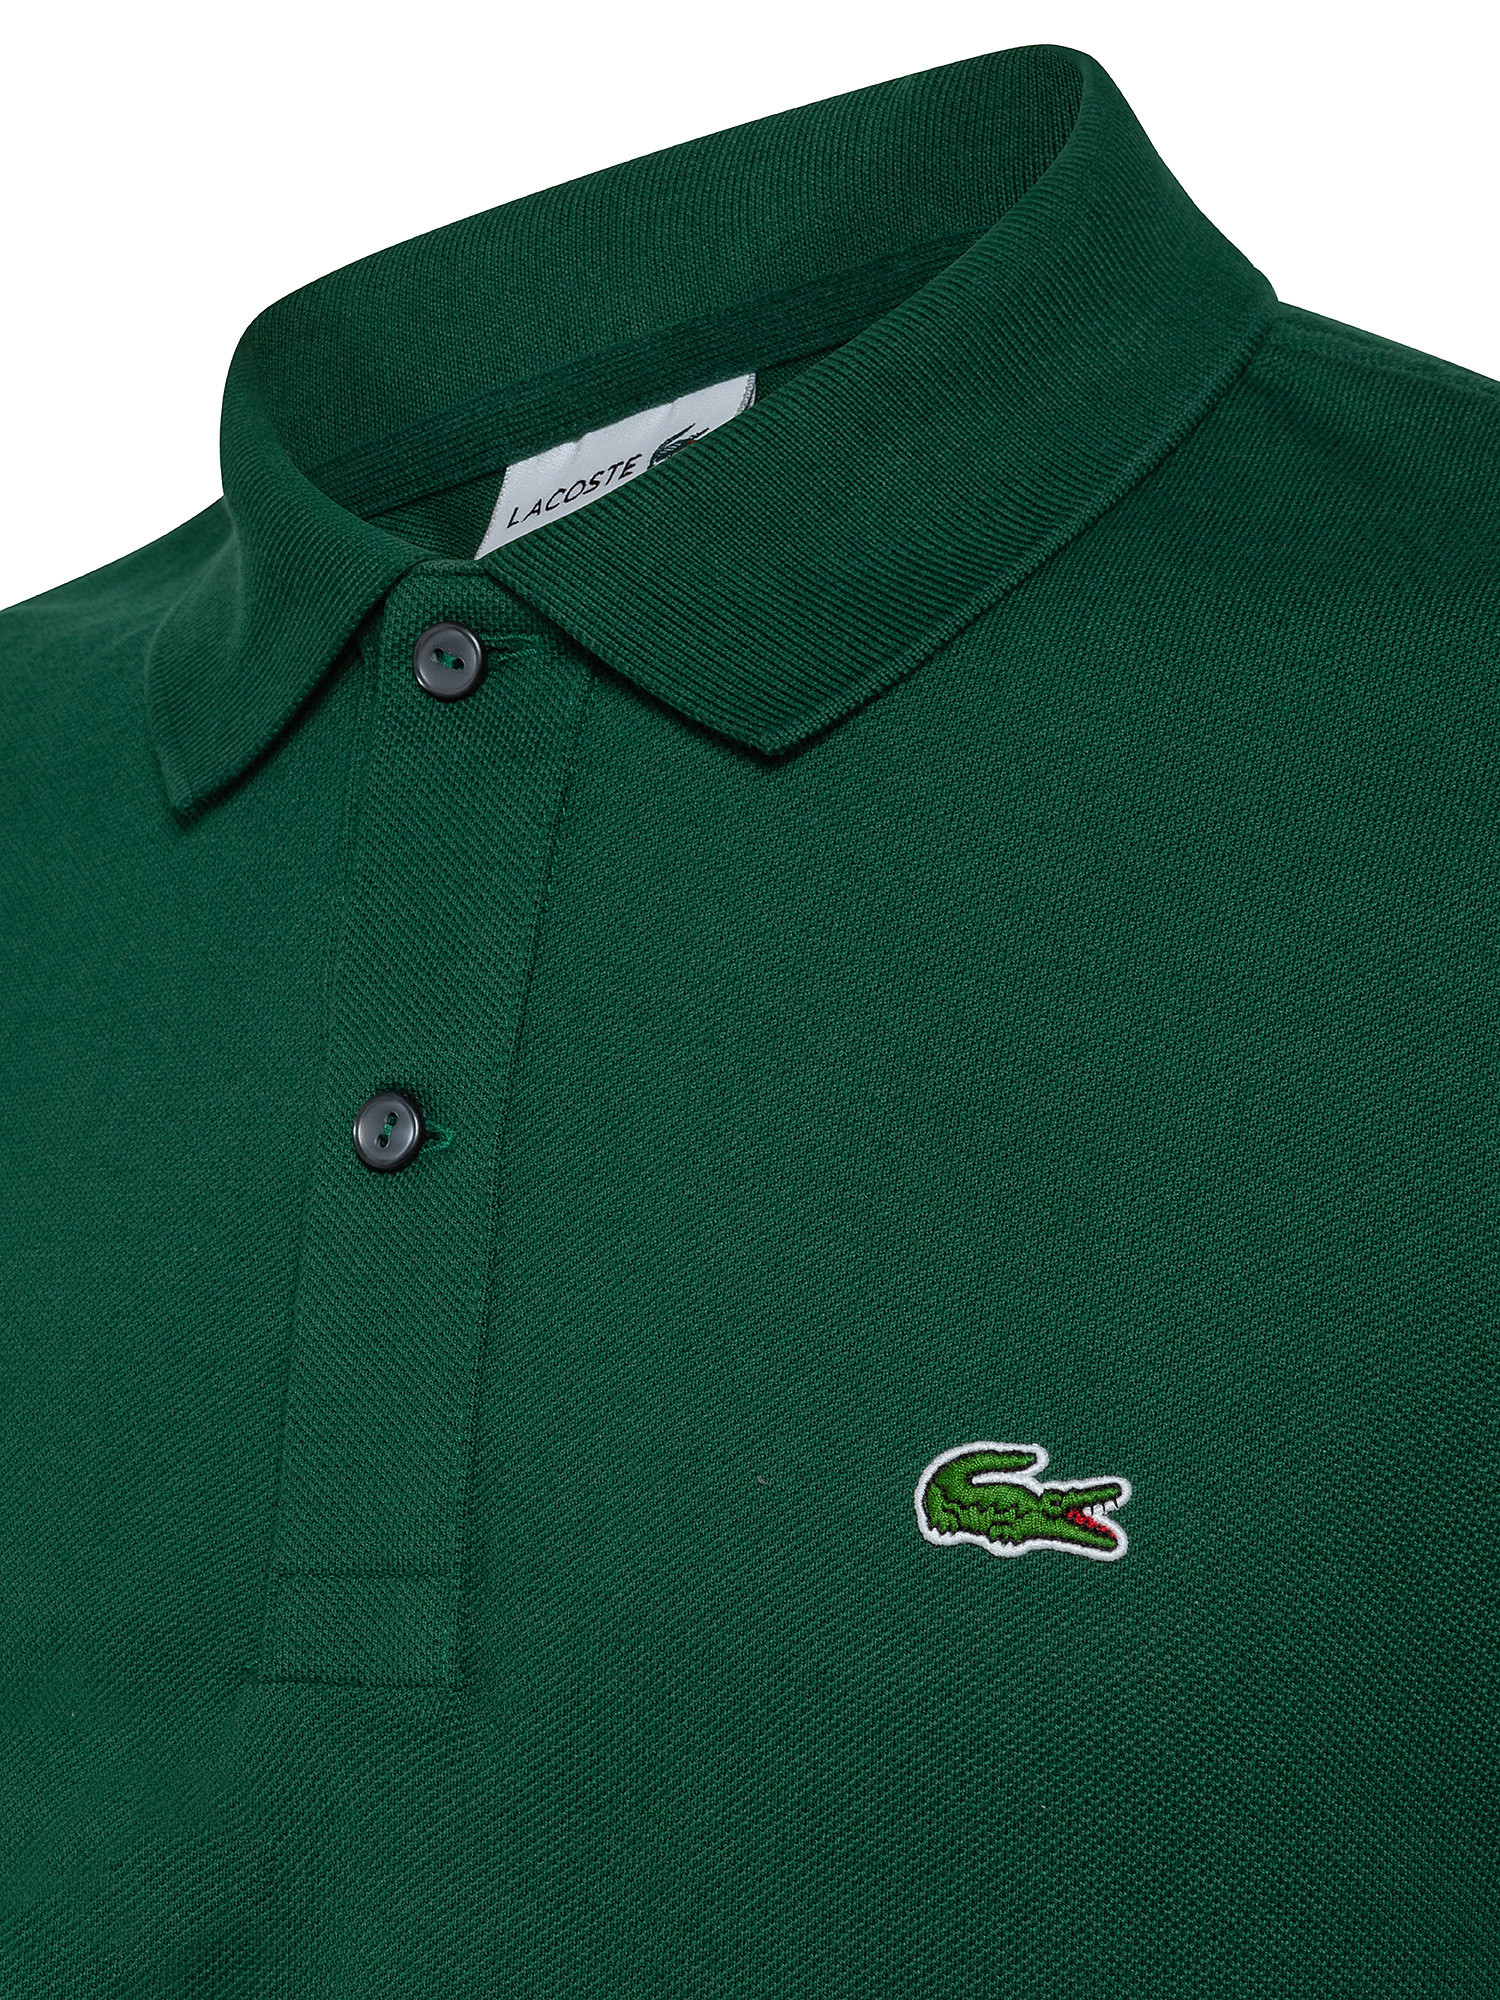 Polo shirt, Green, large image number 2